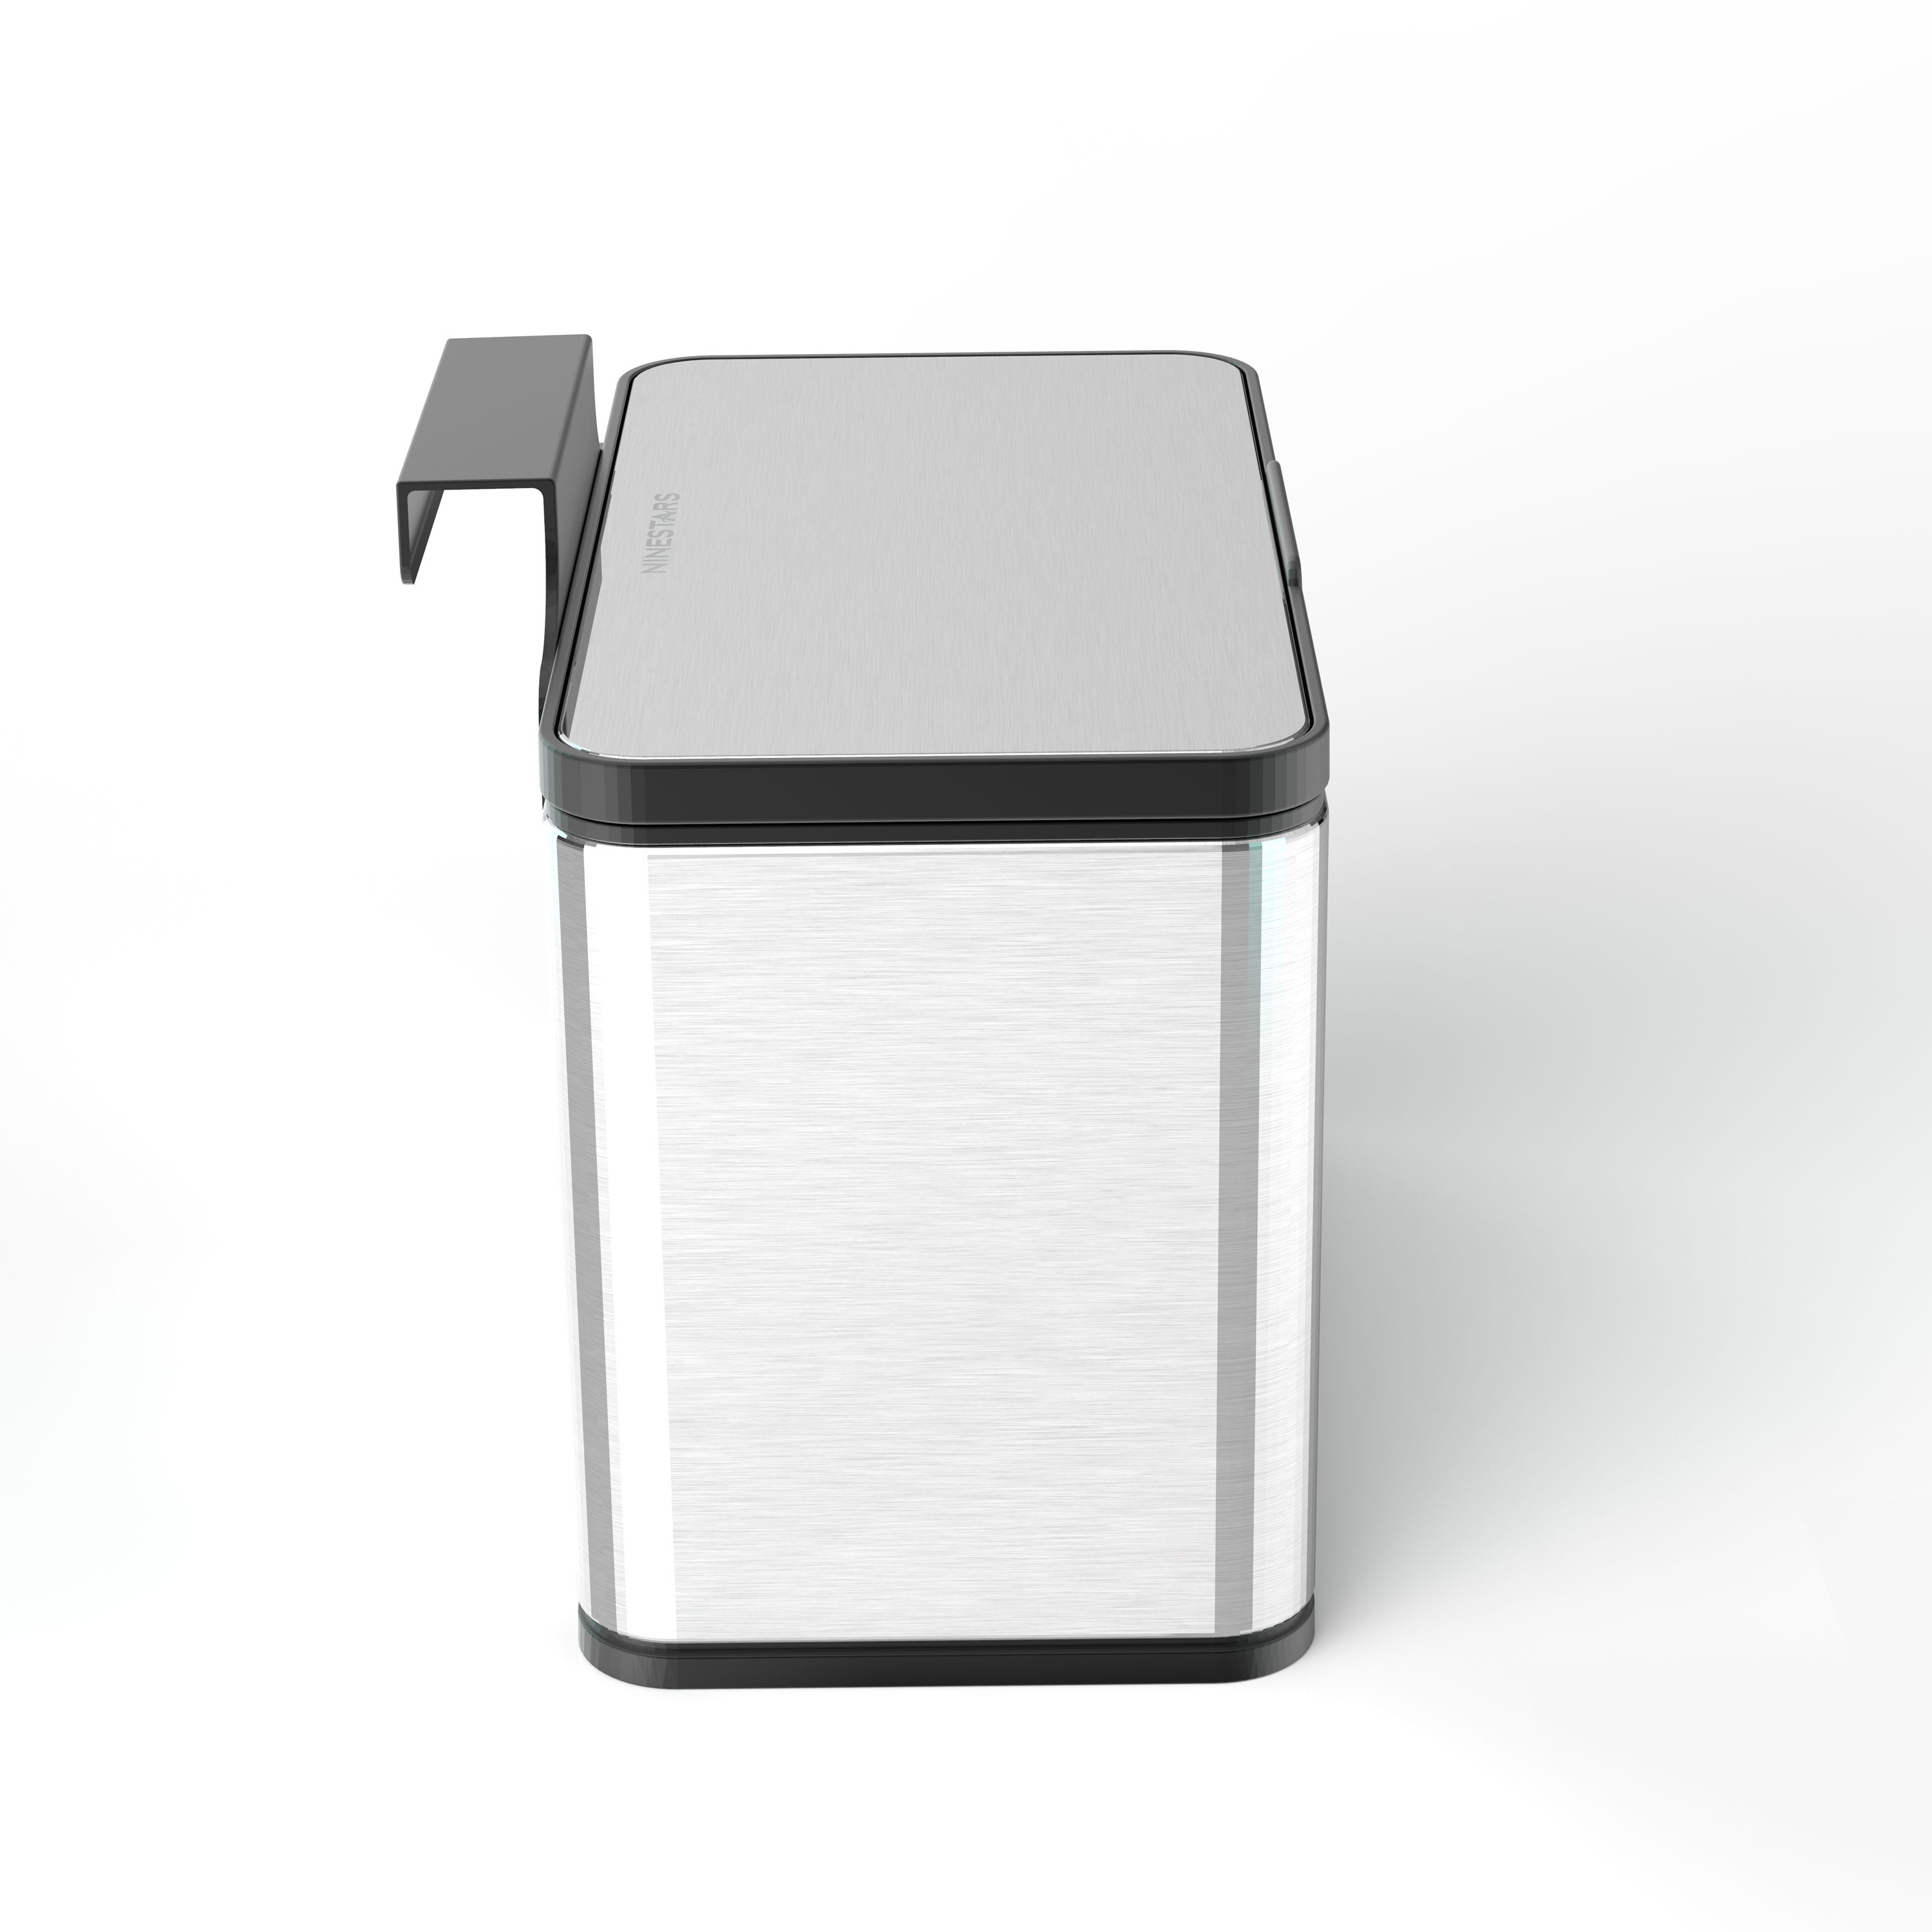 Compact Trash Can for Countertops, Kitchen and Bathroom